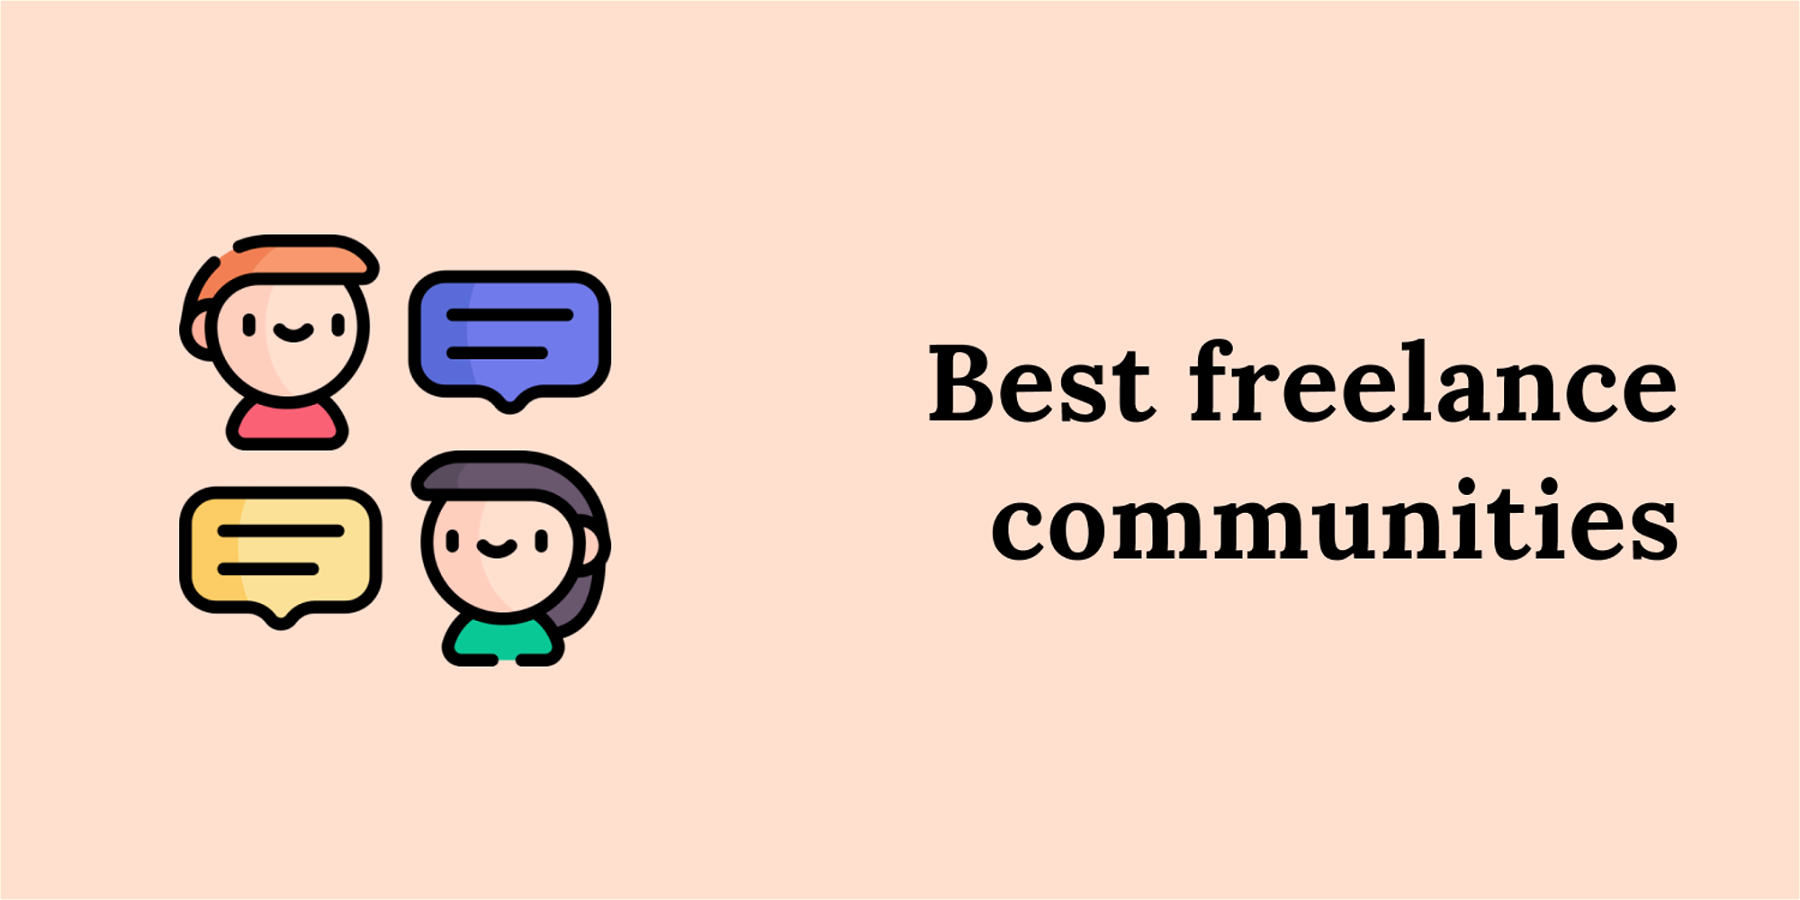 Best freelance communities to join